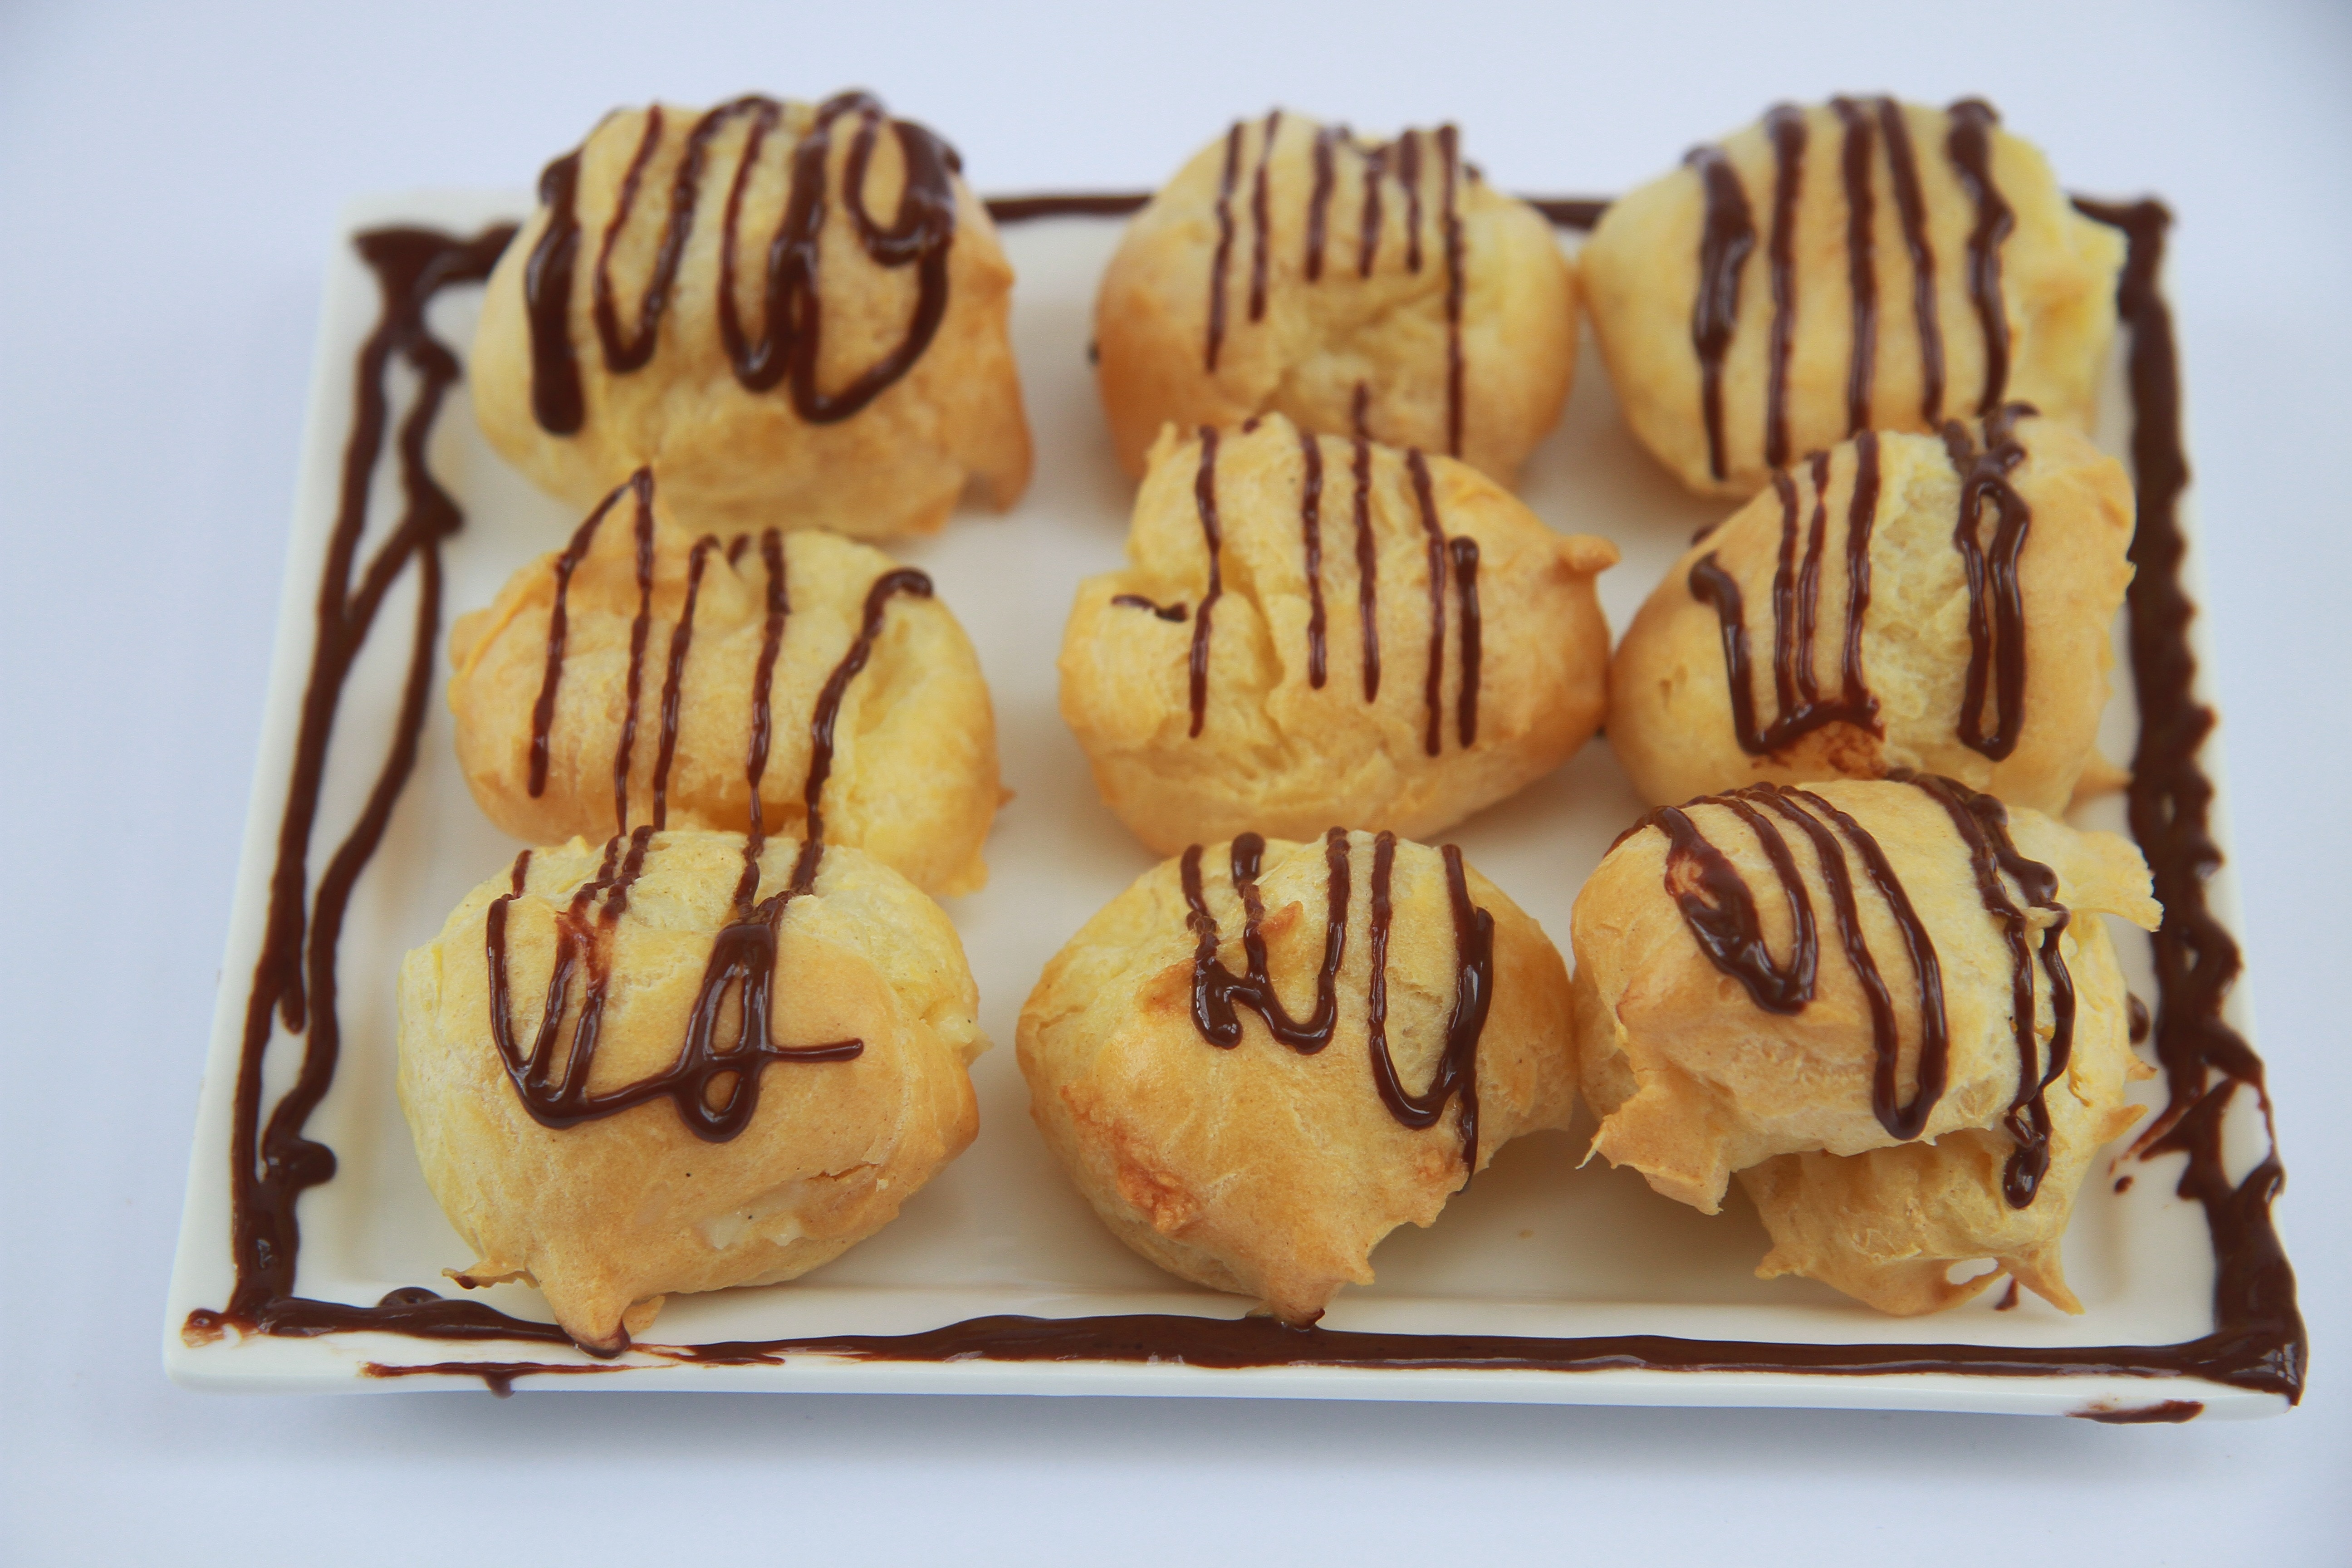 pastry with chocolate toppings